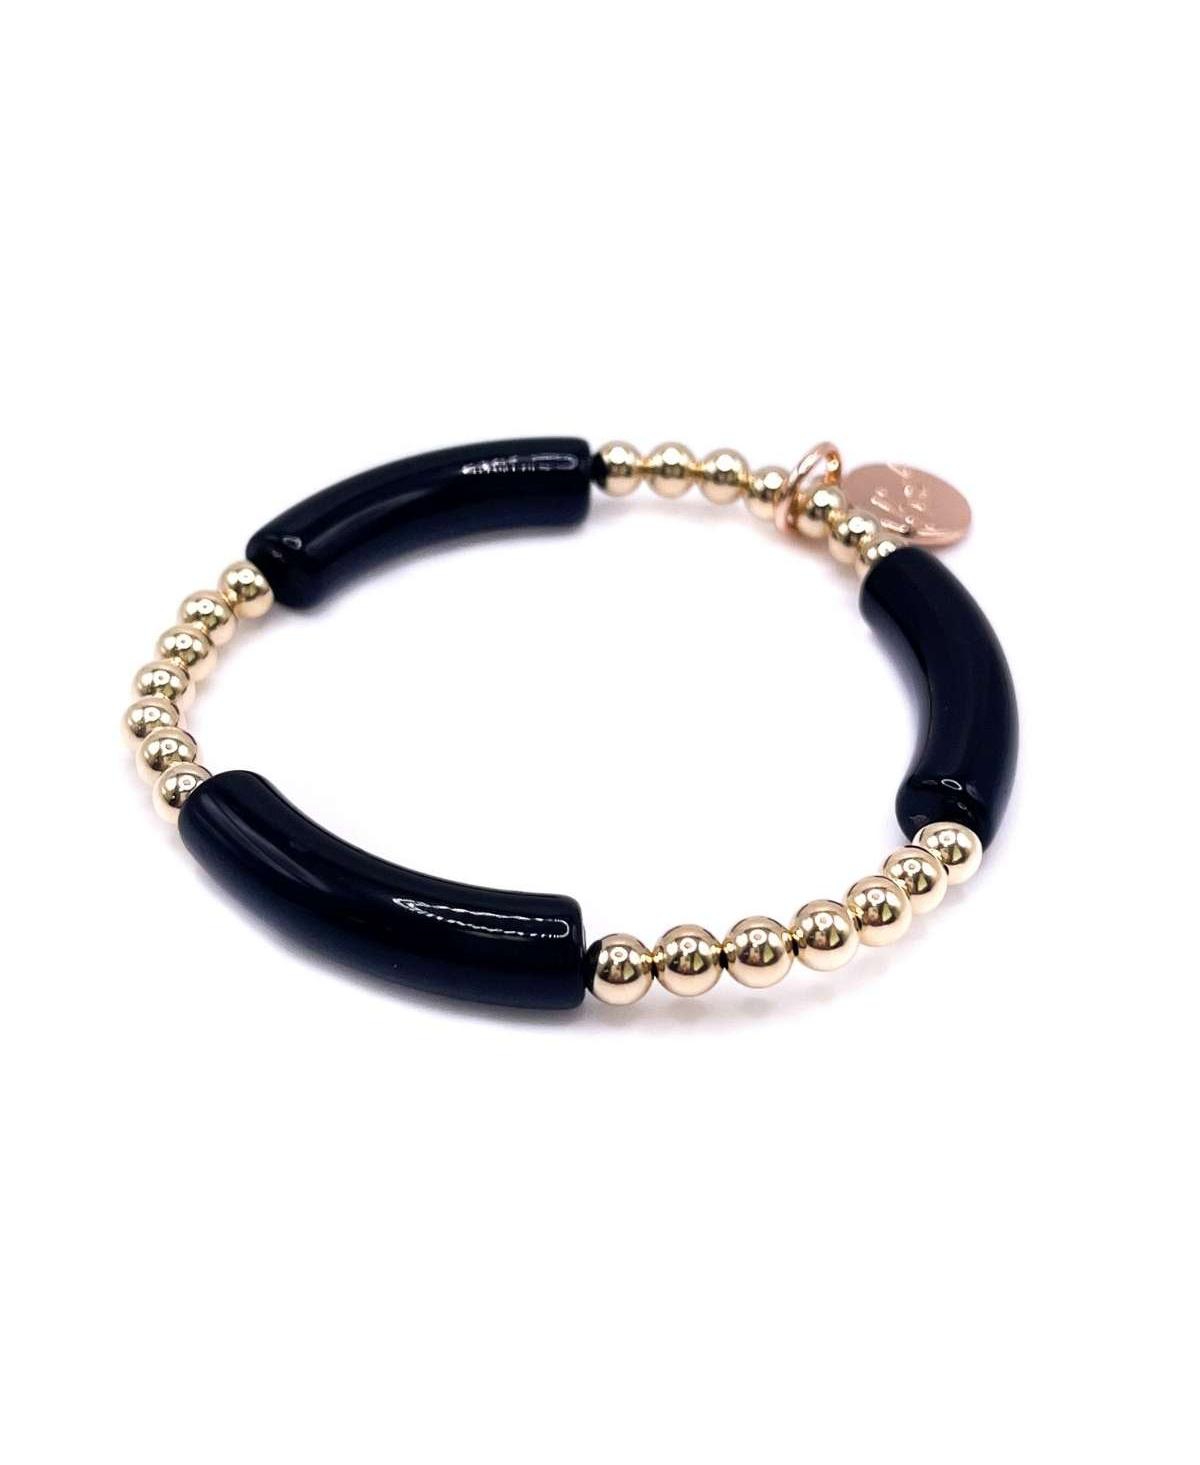 Non-Tarnishing Gold filled, 5mm Gold Ball and Acrylic Stretch Bracelet - Black